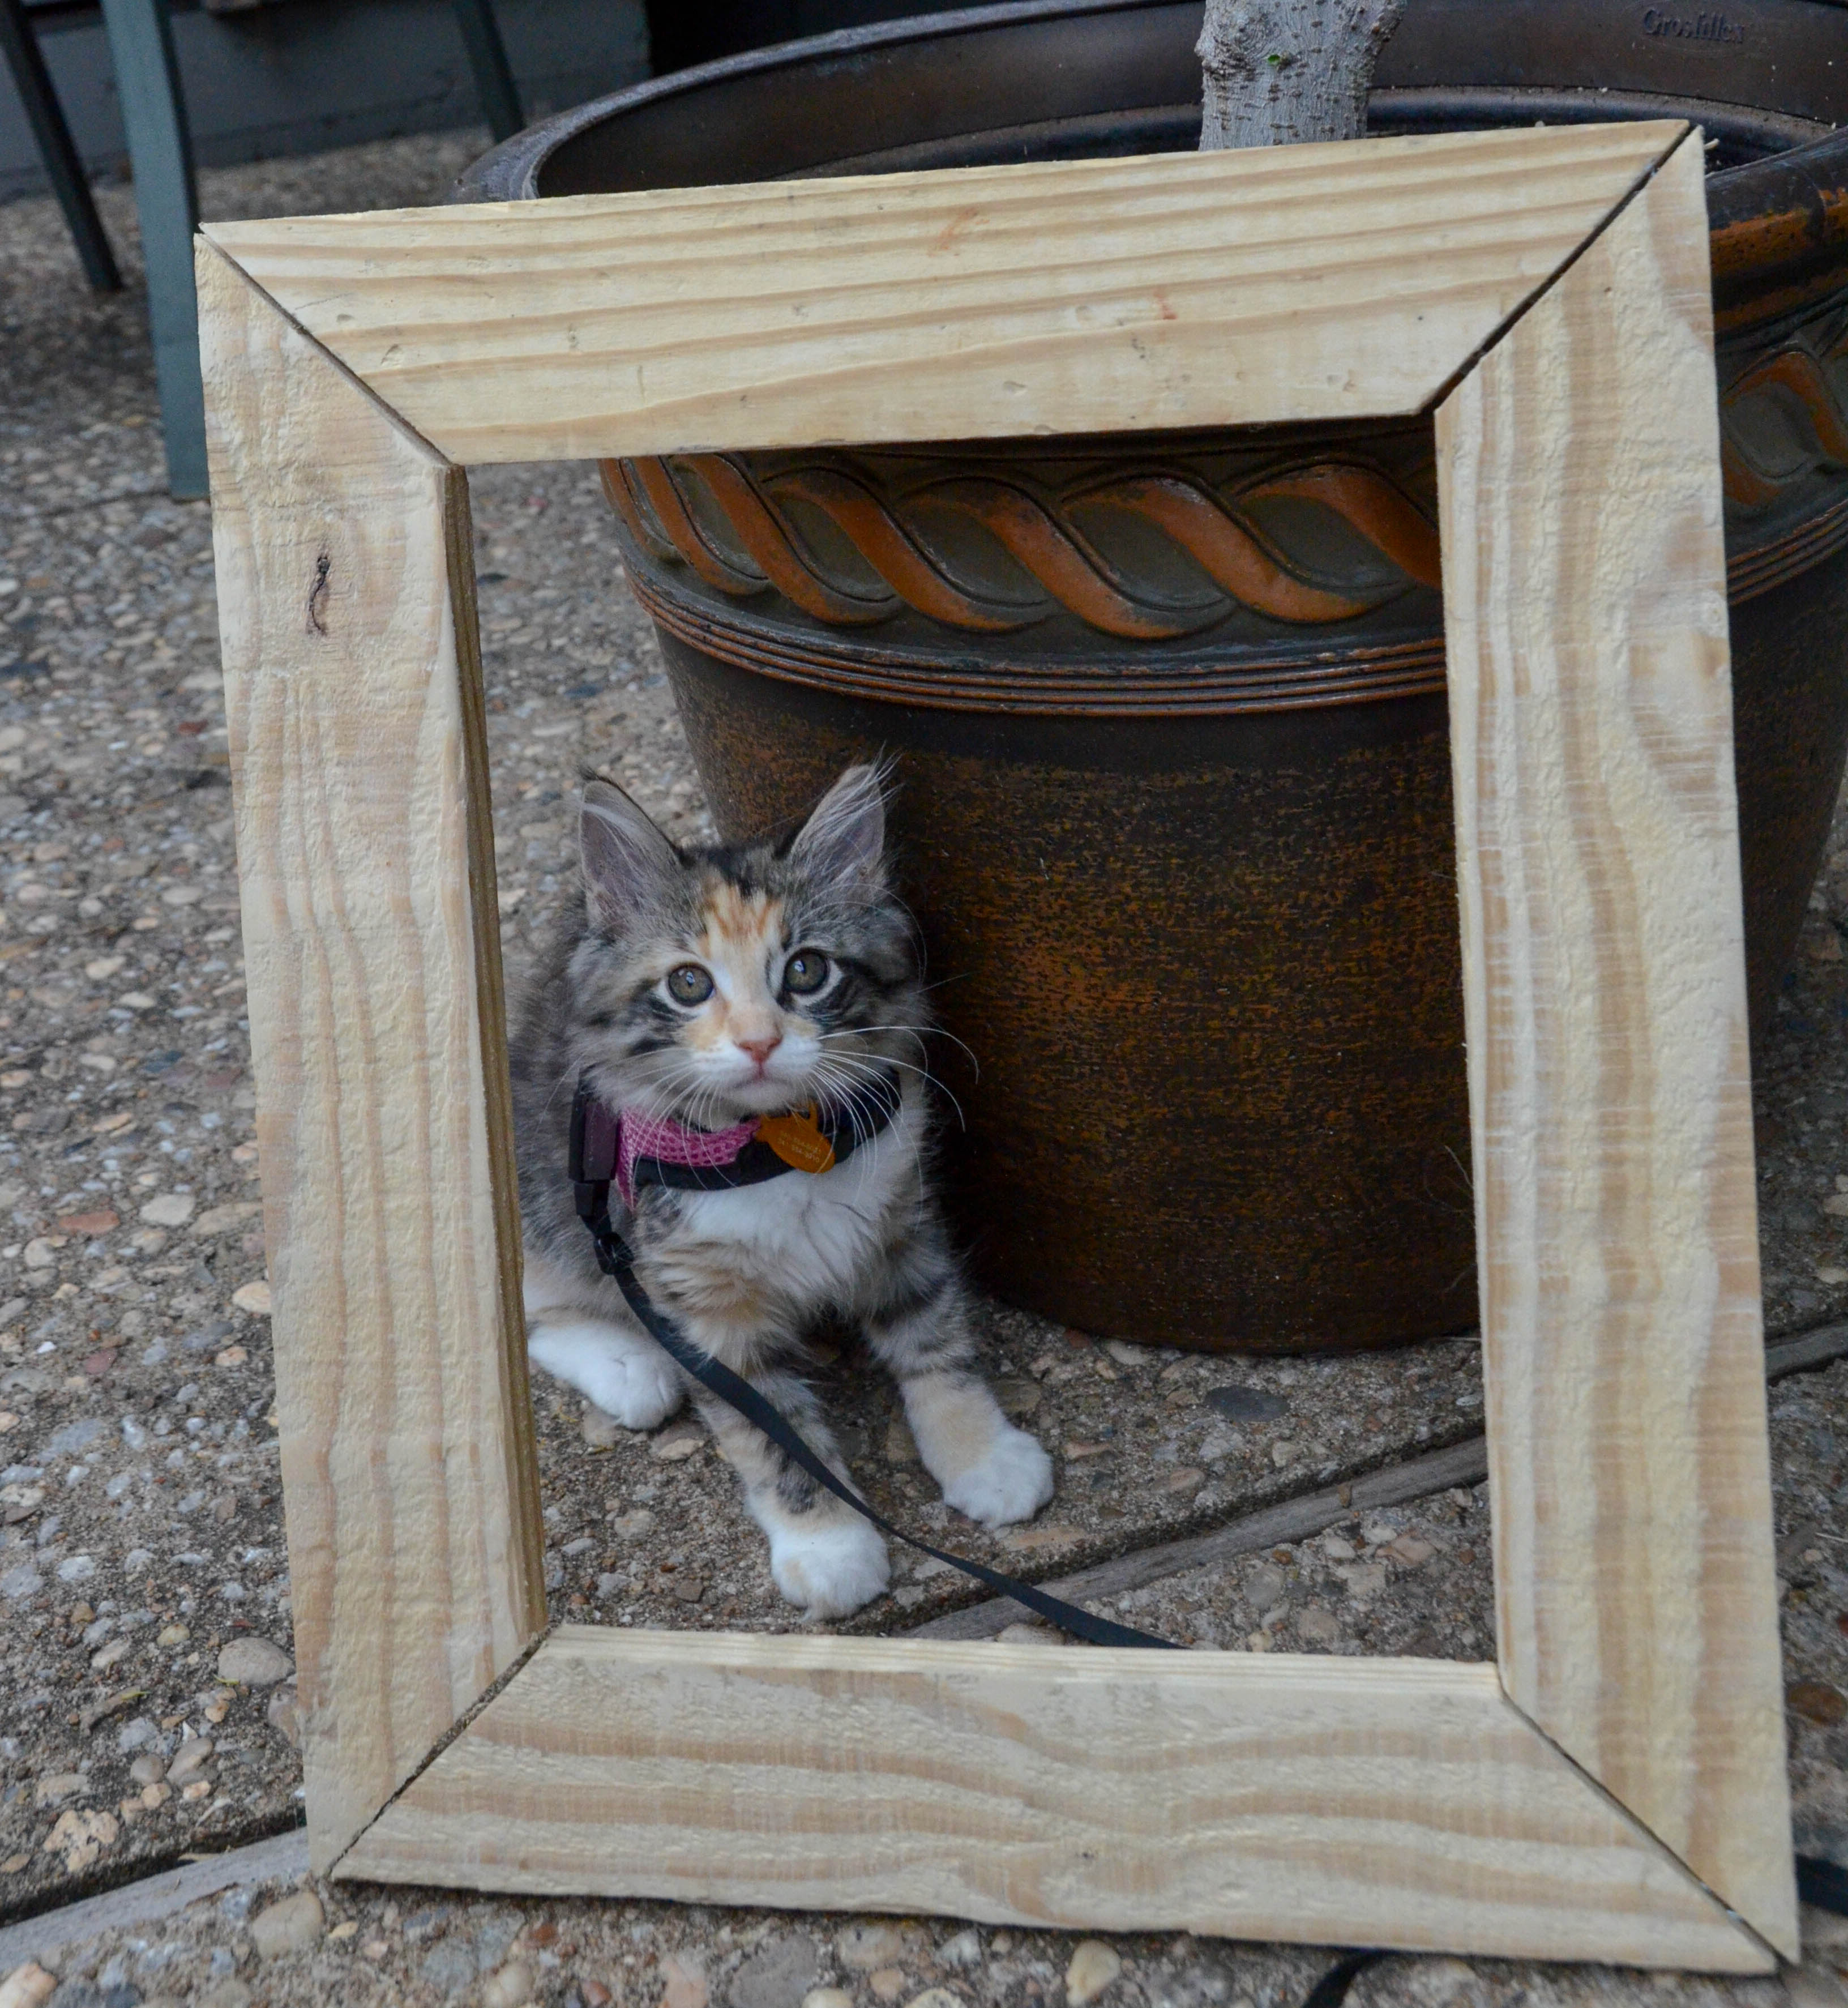 Gypsy framed by a base I built for our closet drawers.